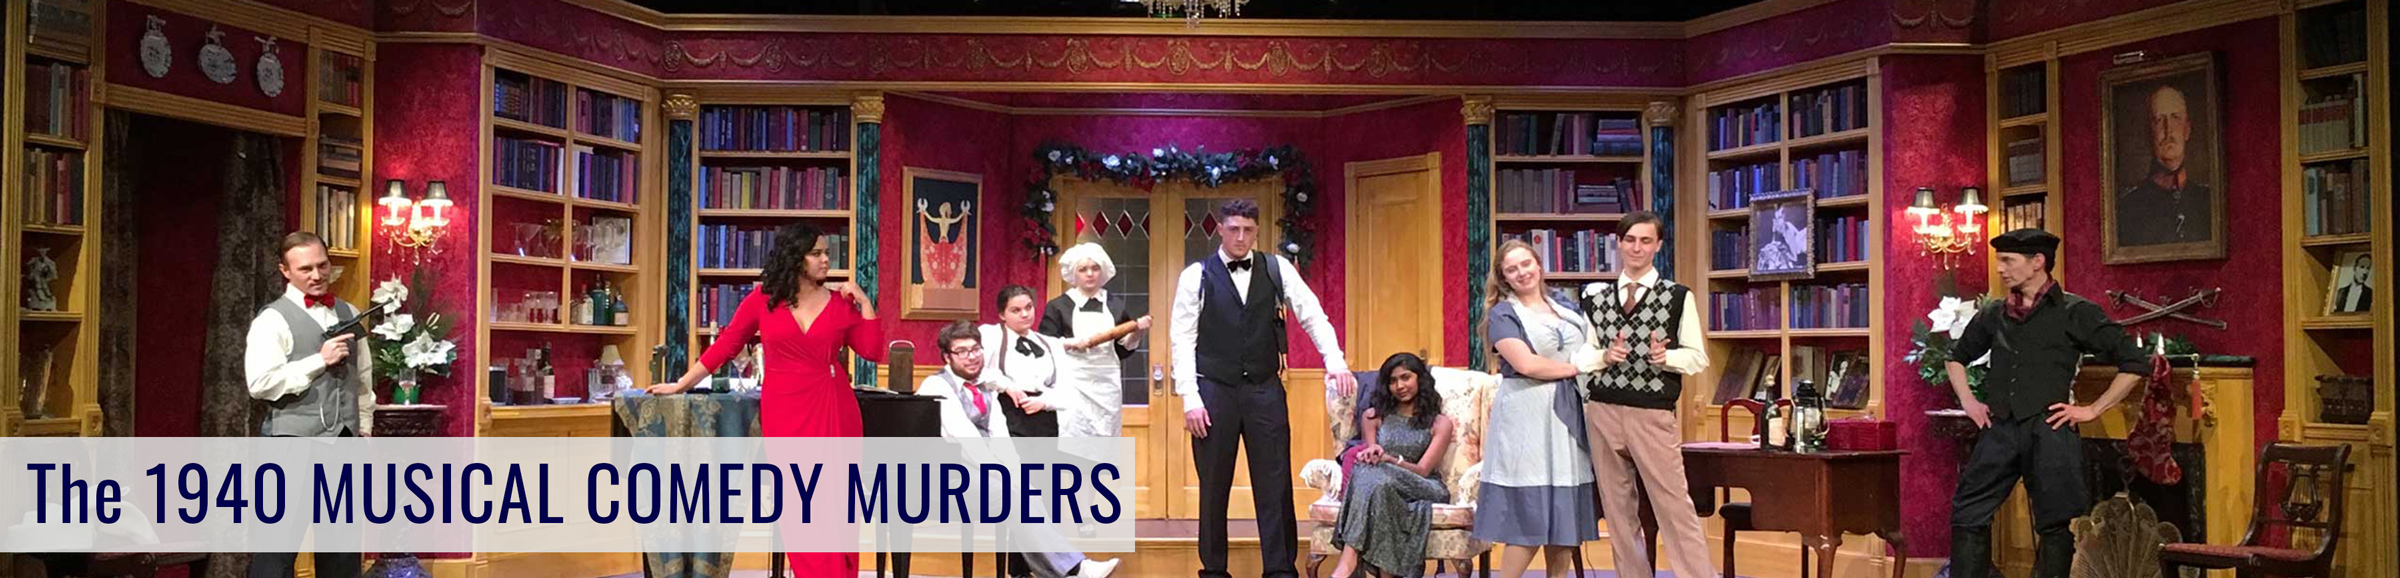 Photo of NCC Students in a play title The 1940 Musical Comedy Murders